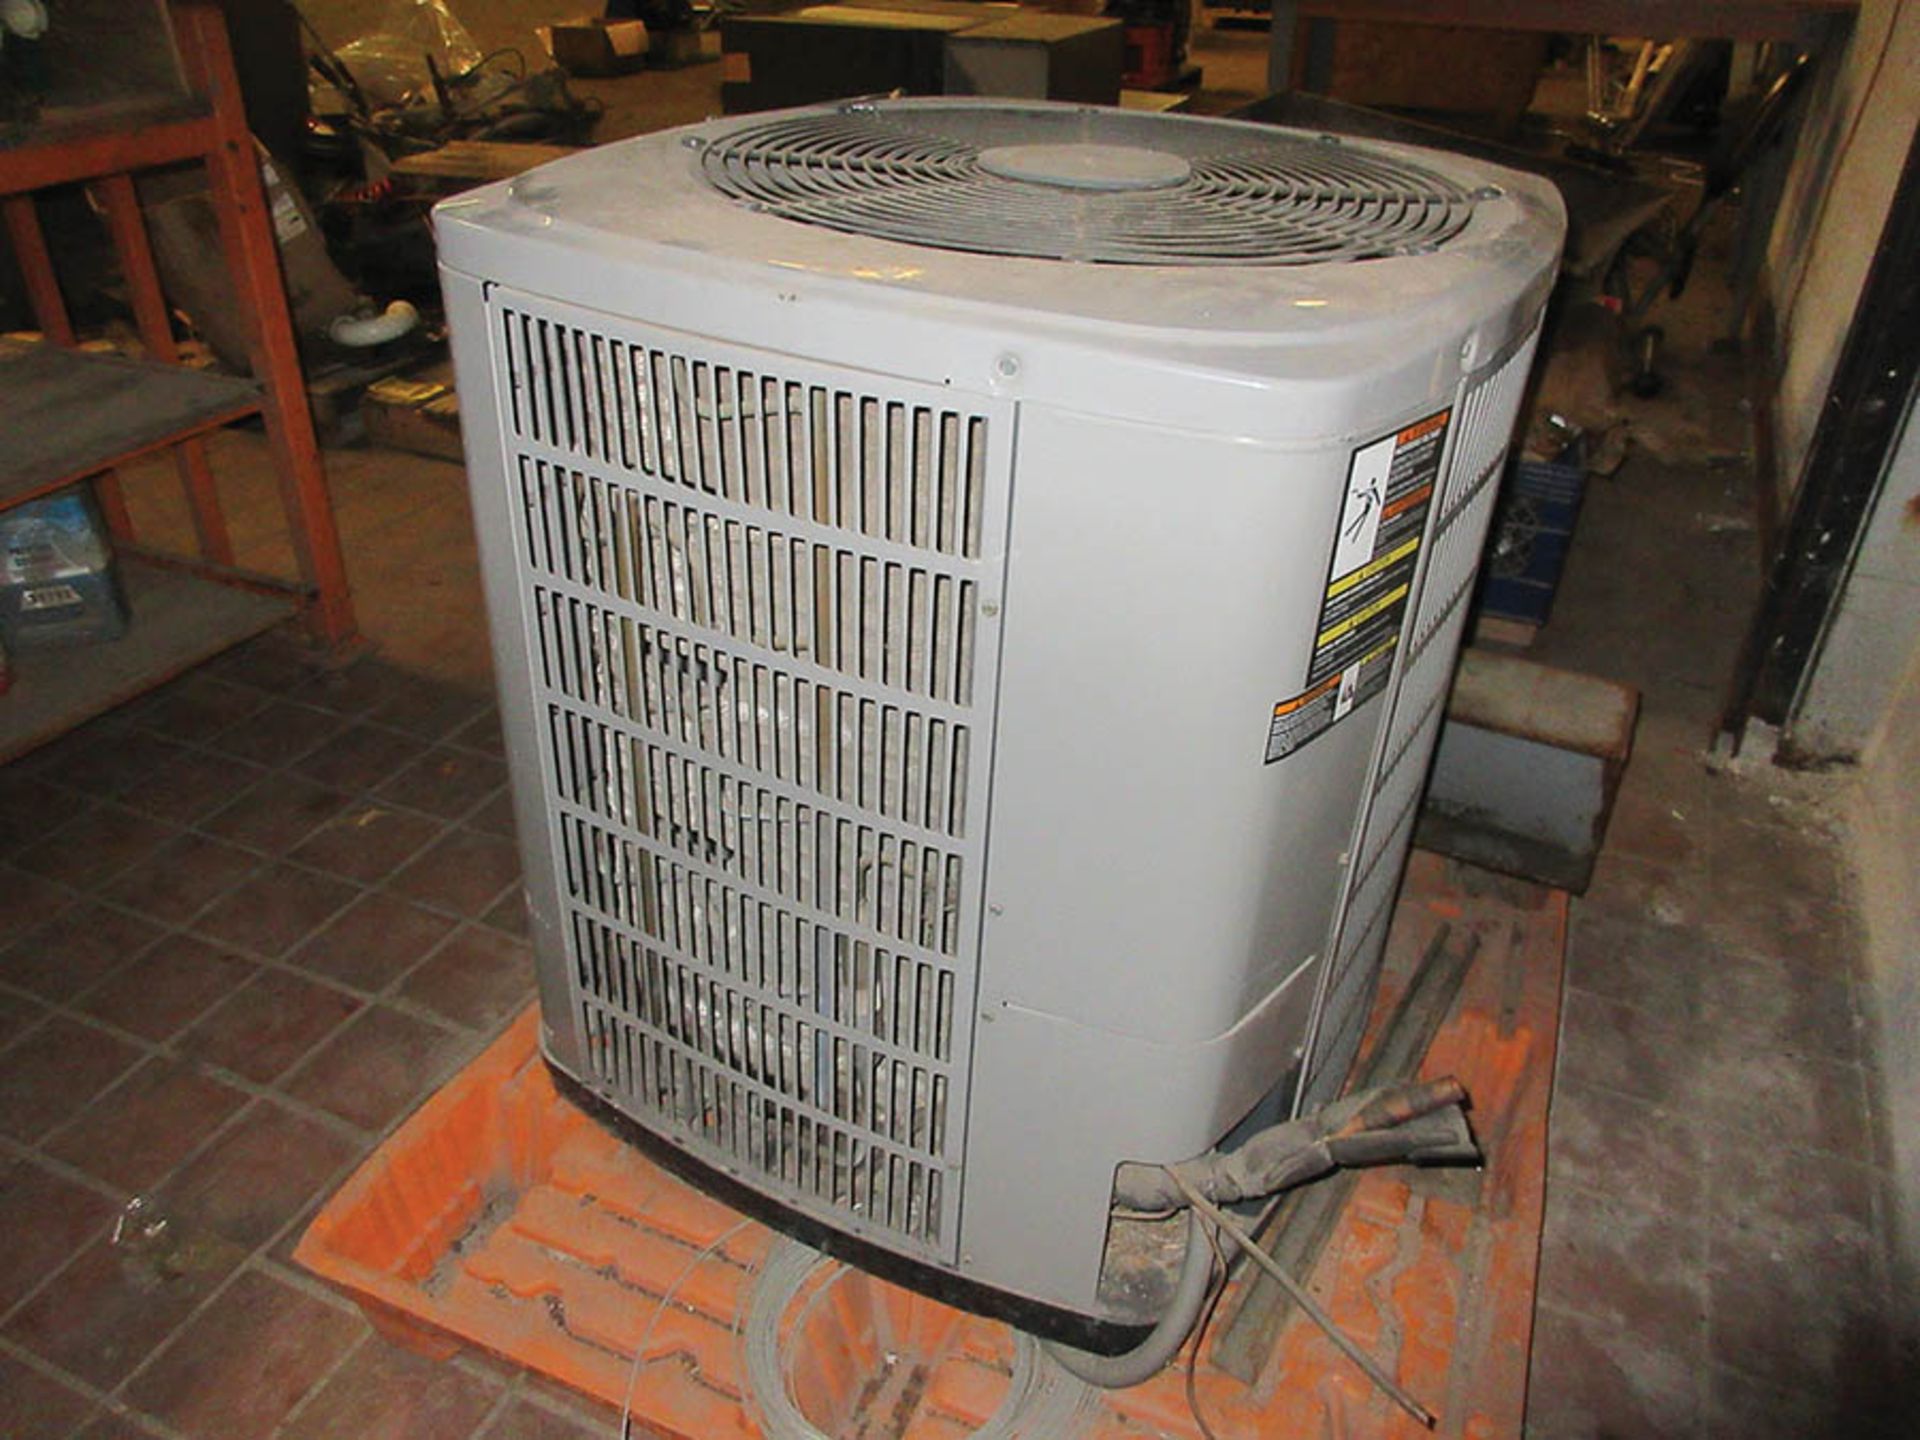 2006 AMERICAN STANDARD ALLEGIANCE 13 CENTRAL AIR CONDITIONER, 200-230/60/ SINGLE PHASE - Image 2 of 3